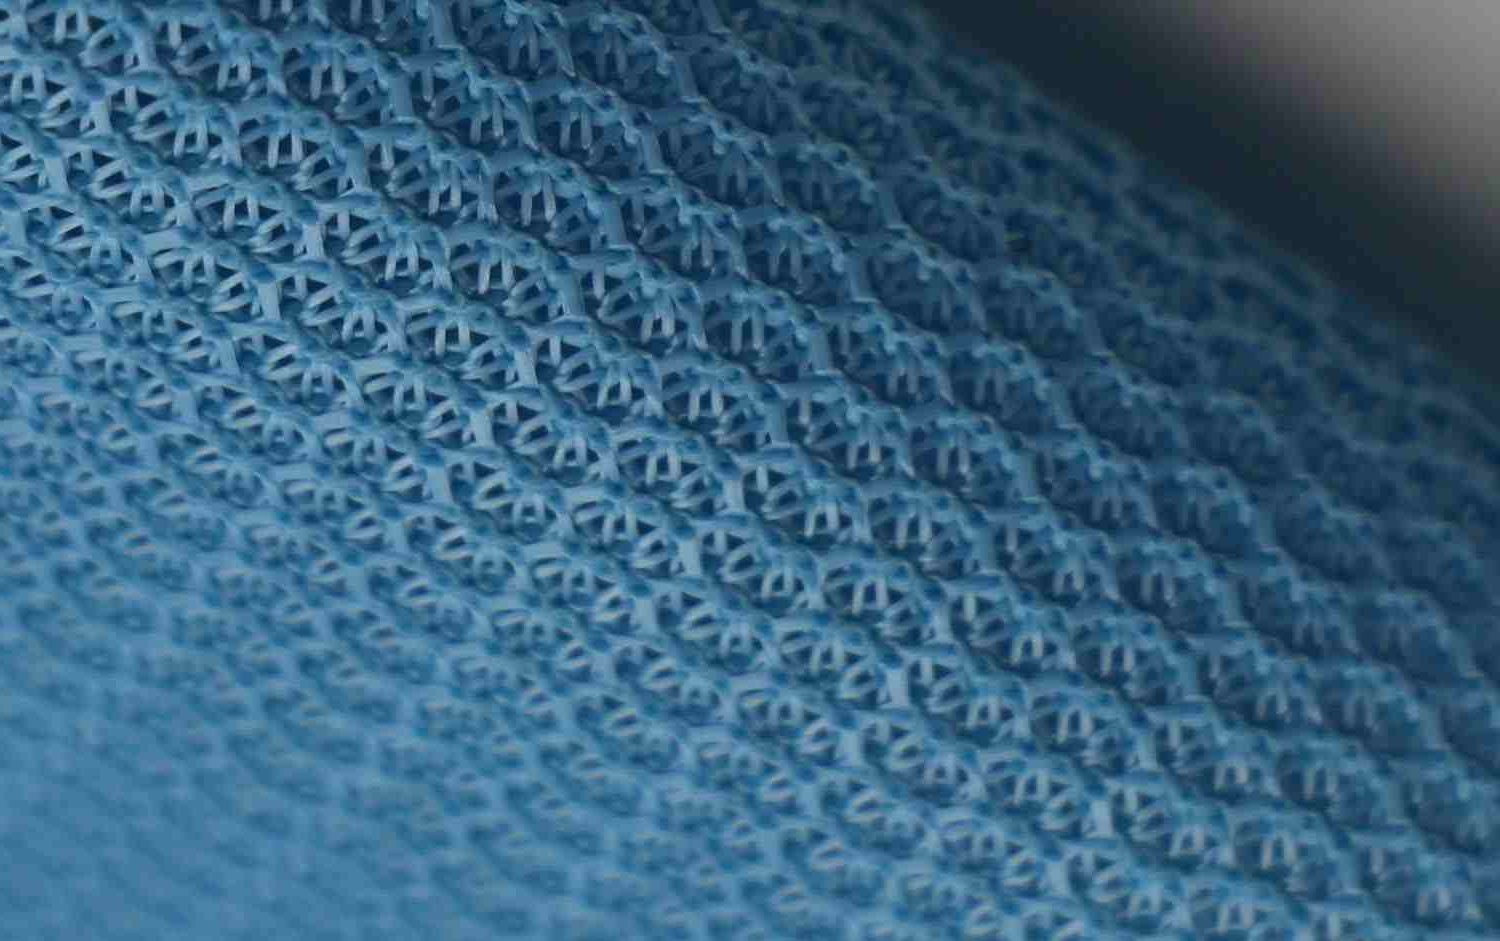 Tricot fabric made out of